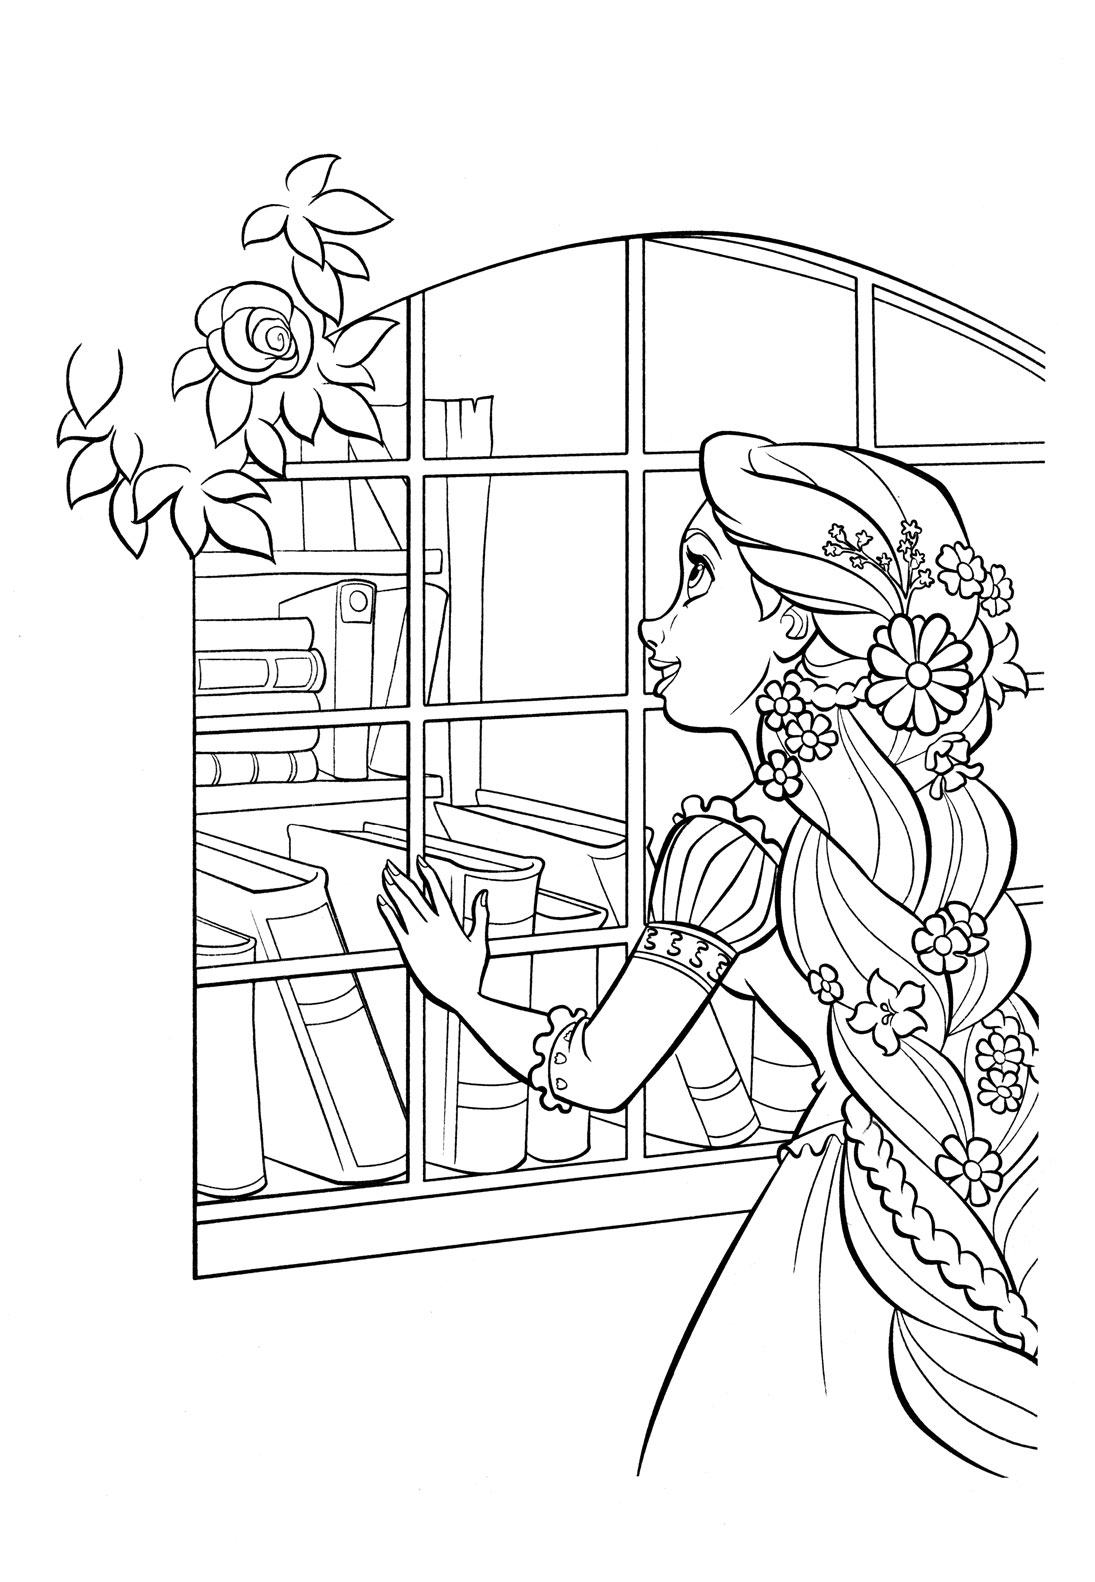 Rapunzel Coloring Pages - Best Coloring Pages For Kids